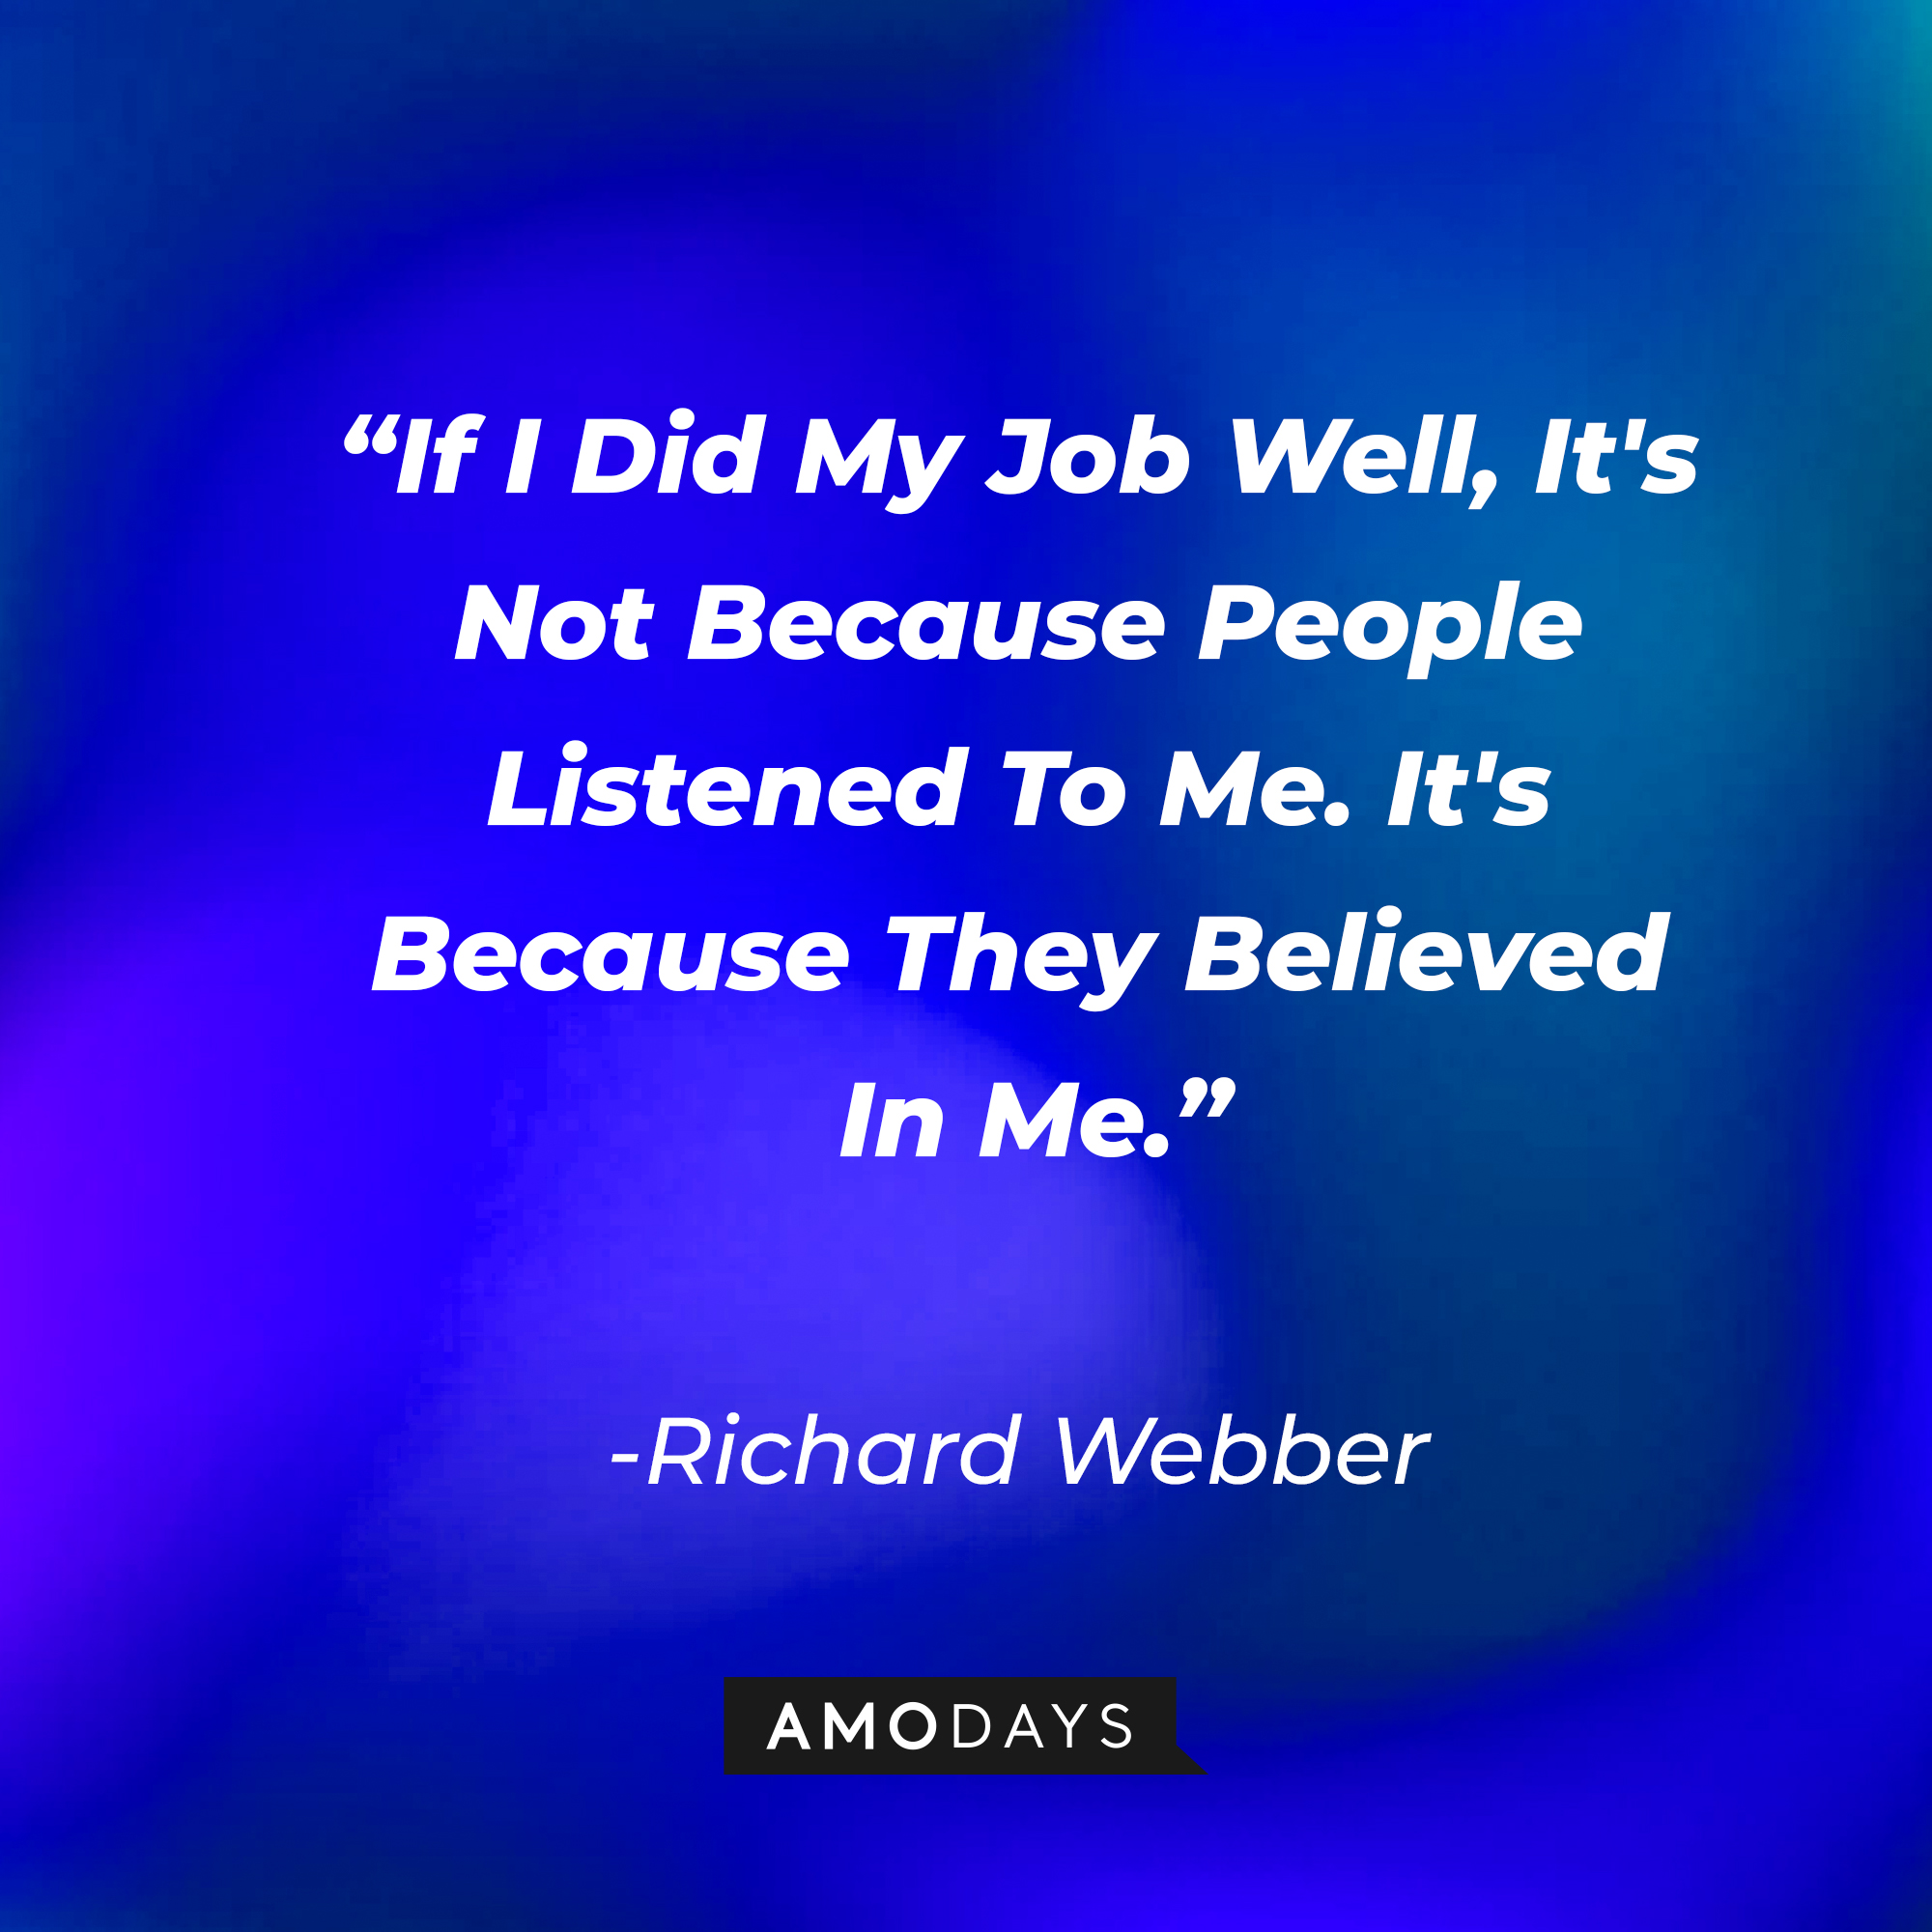 Richard Webber with his quote: "If I did my job well, Its not because people listened to me. It's because they believed in me." | Source: Amodays